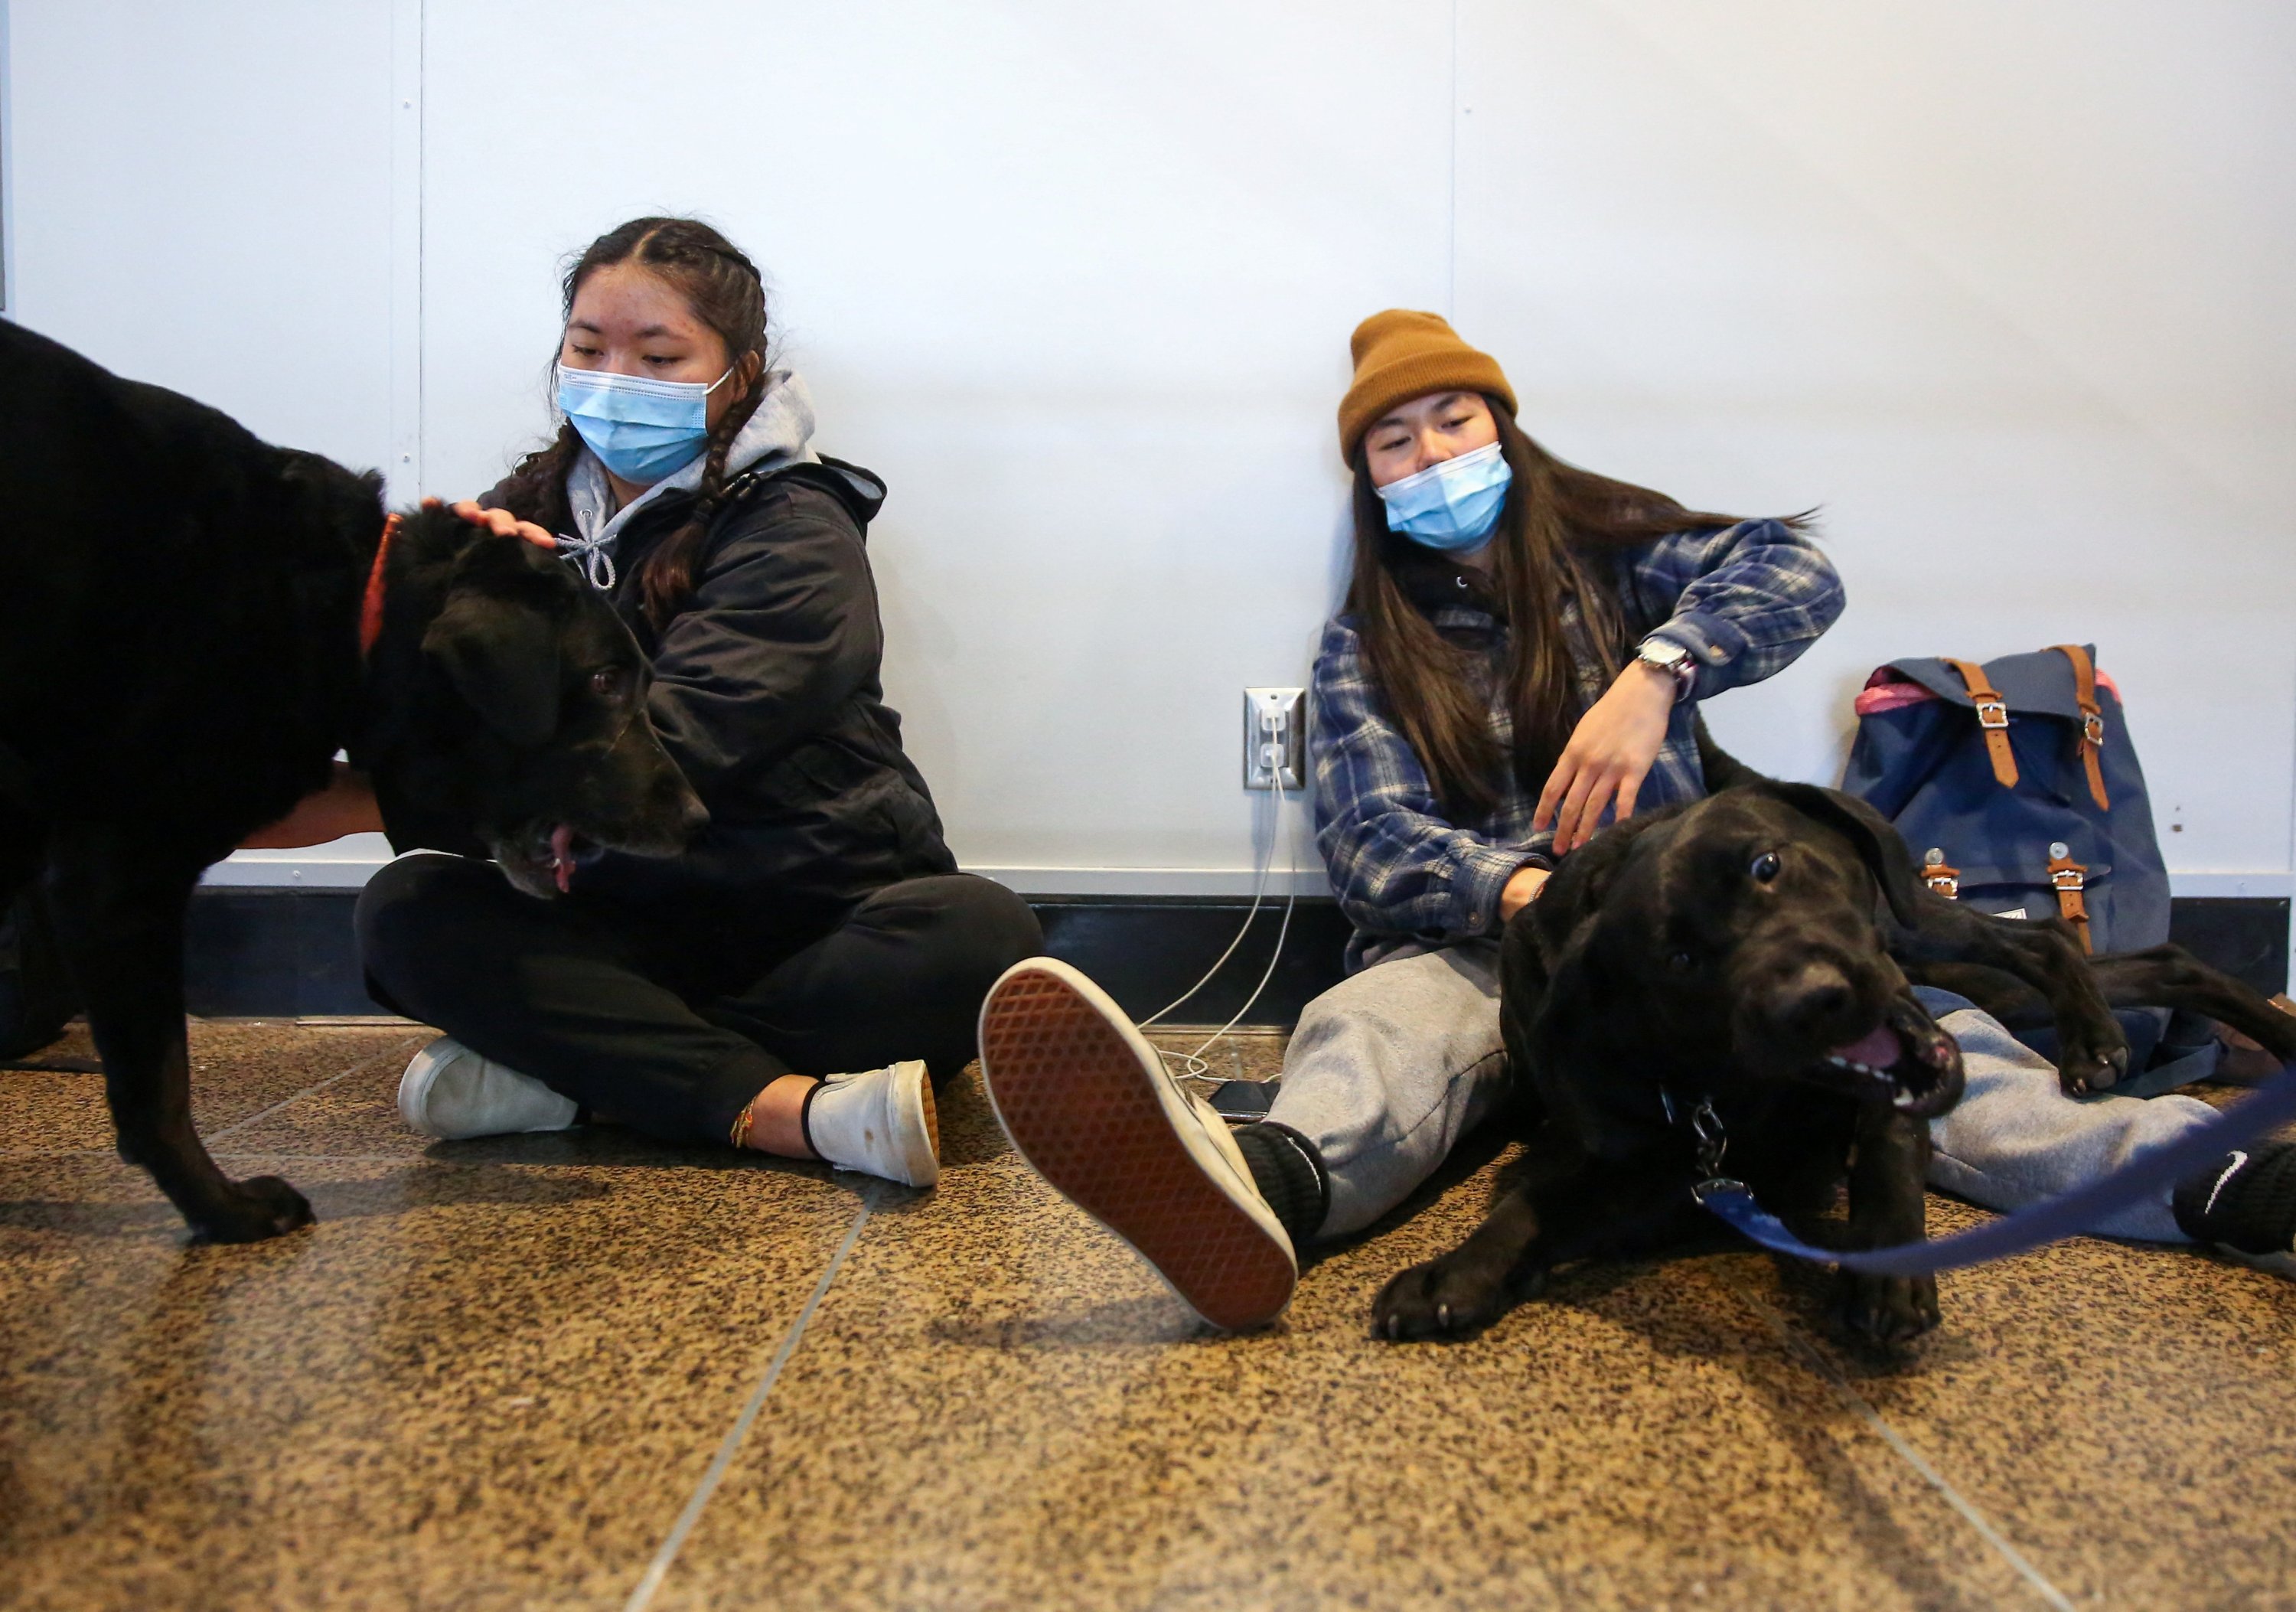 Traveling from Kansas City to their home in Anchorage, Alaska, Hannah Daniel, 16, plays with black lab Ben, as sister Aisling Daniel, 18, plays with Max while waiting for their hotel check-in time after spending the previous night at the airport due to multiple flight cancellations, luggage issues and pet embargoes at Seattle-Tacoma International Airport (Sea-Tac) in Seattle, Washington, U.S., Dec. 27, 2021. (Reuters Photo)